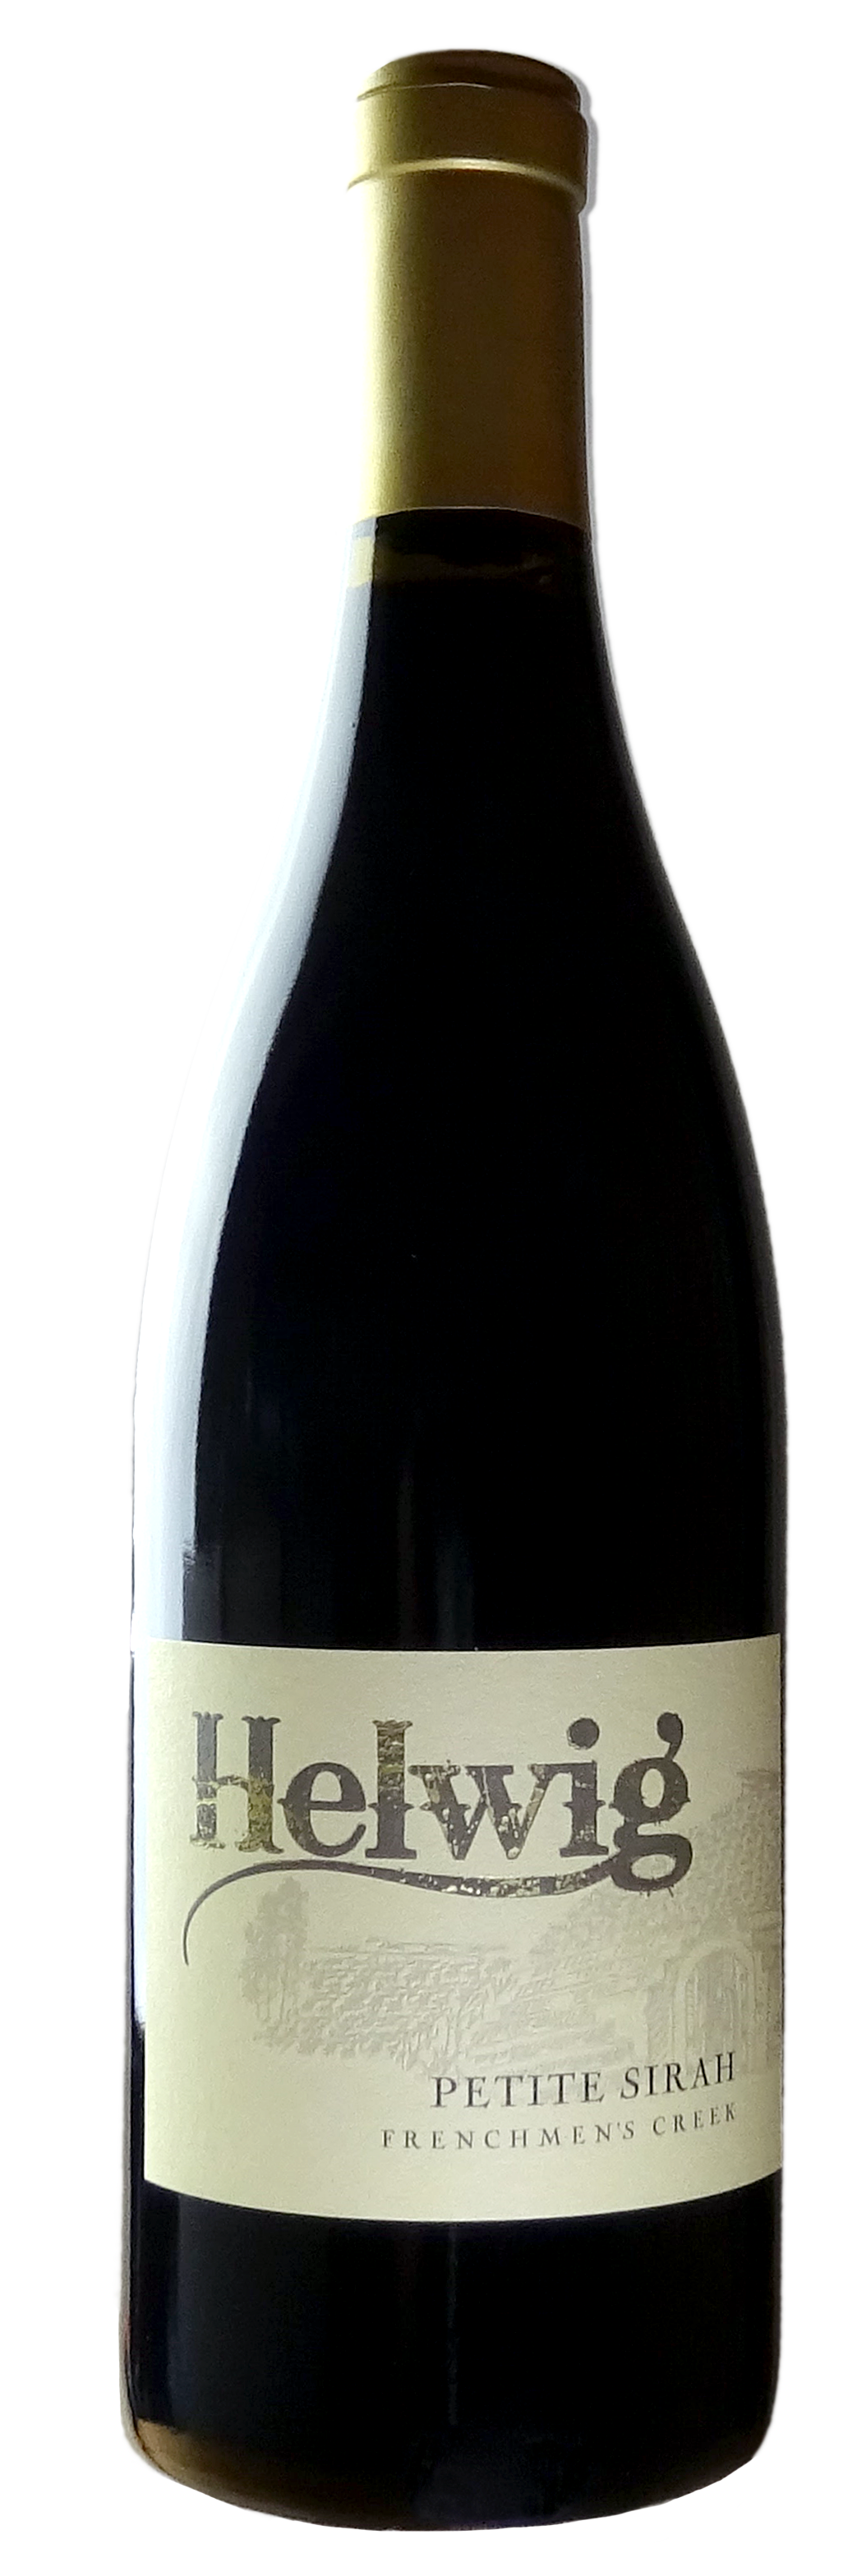 Product Image for Petite Sirah - Frenchmen's Creek '16